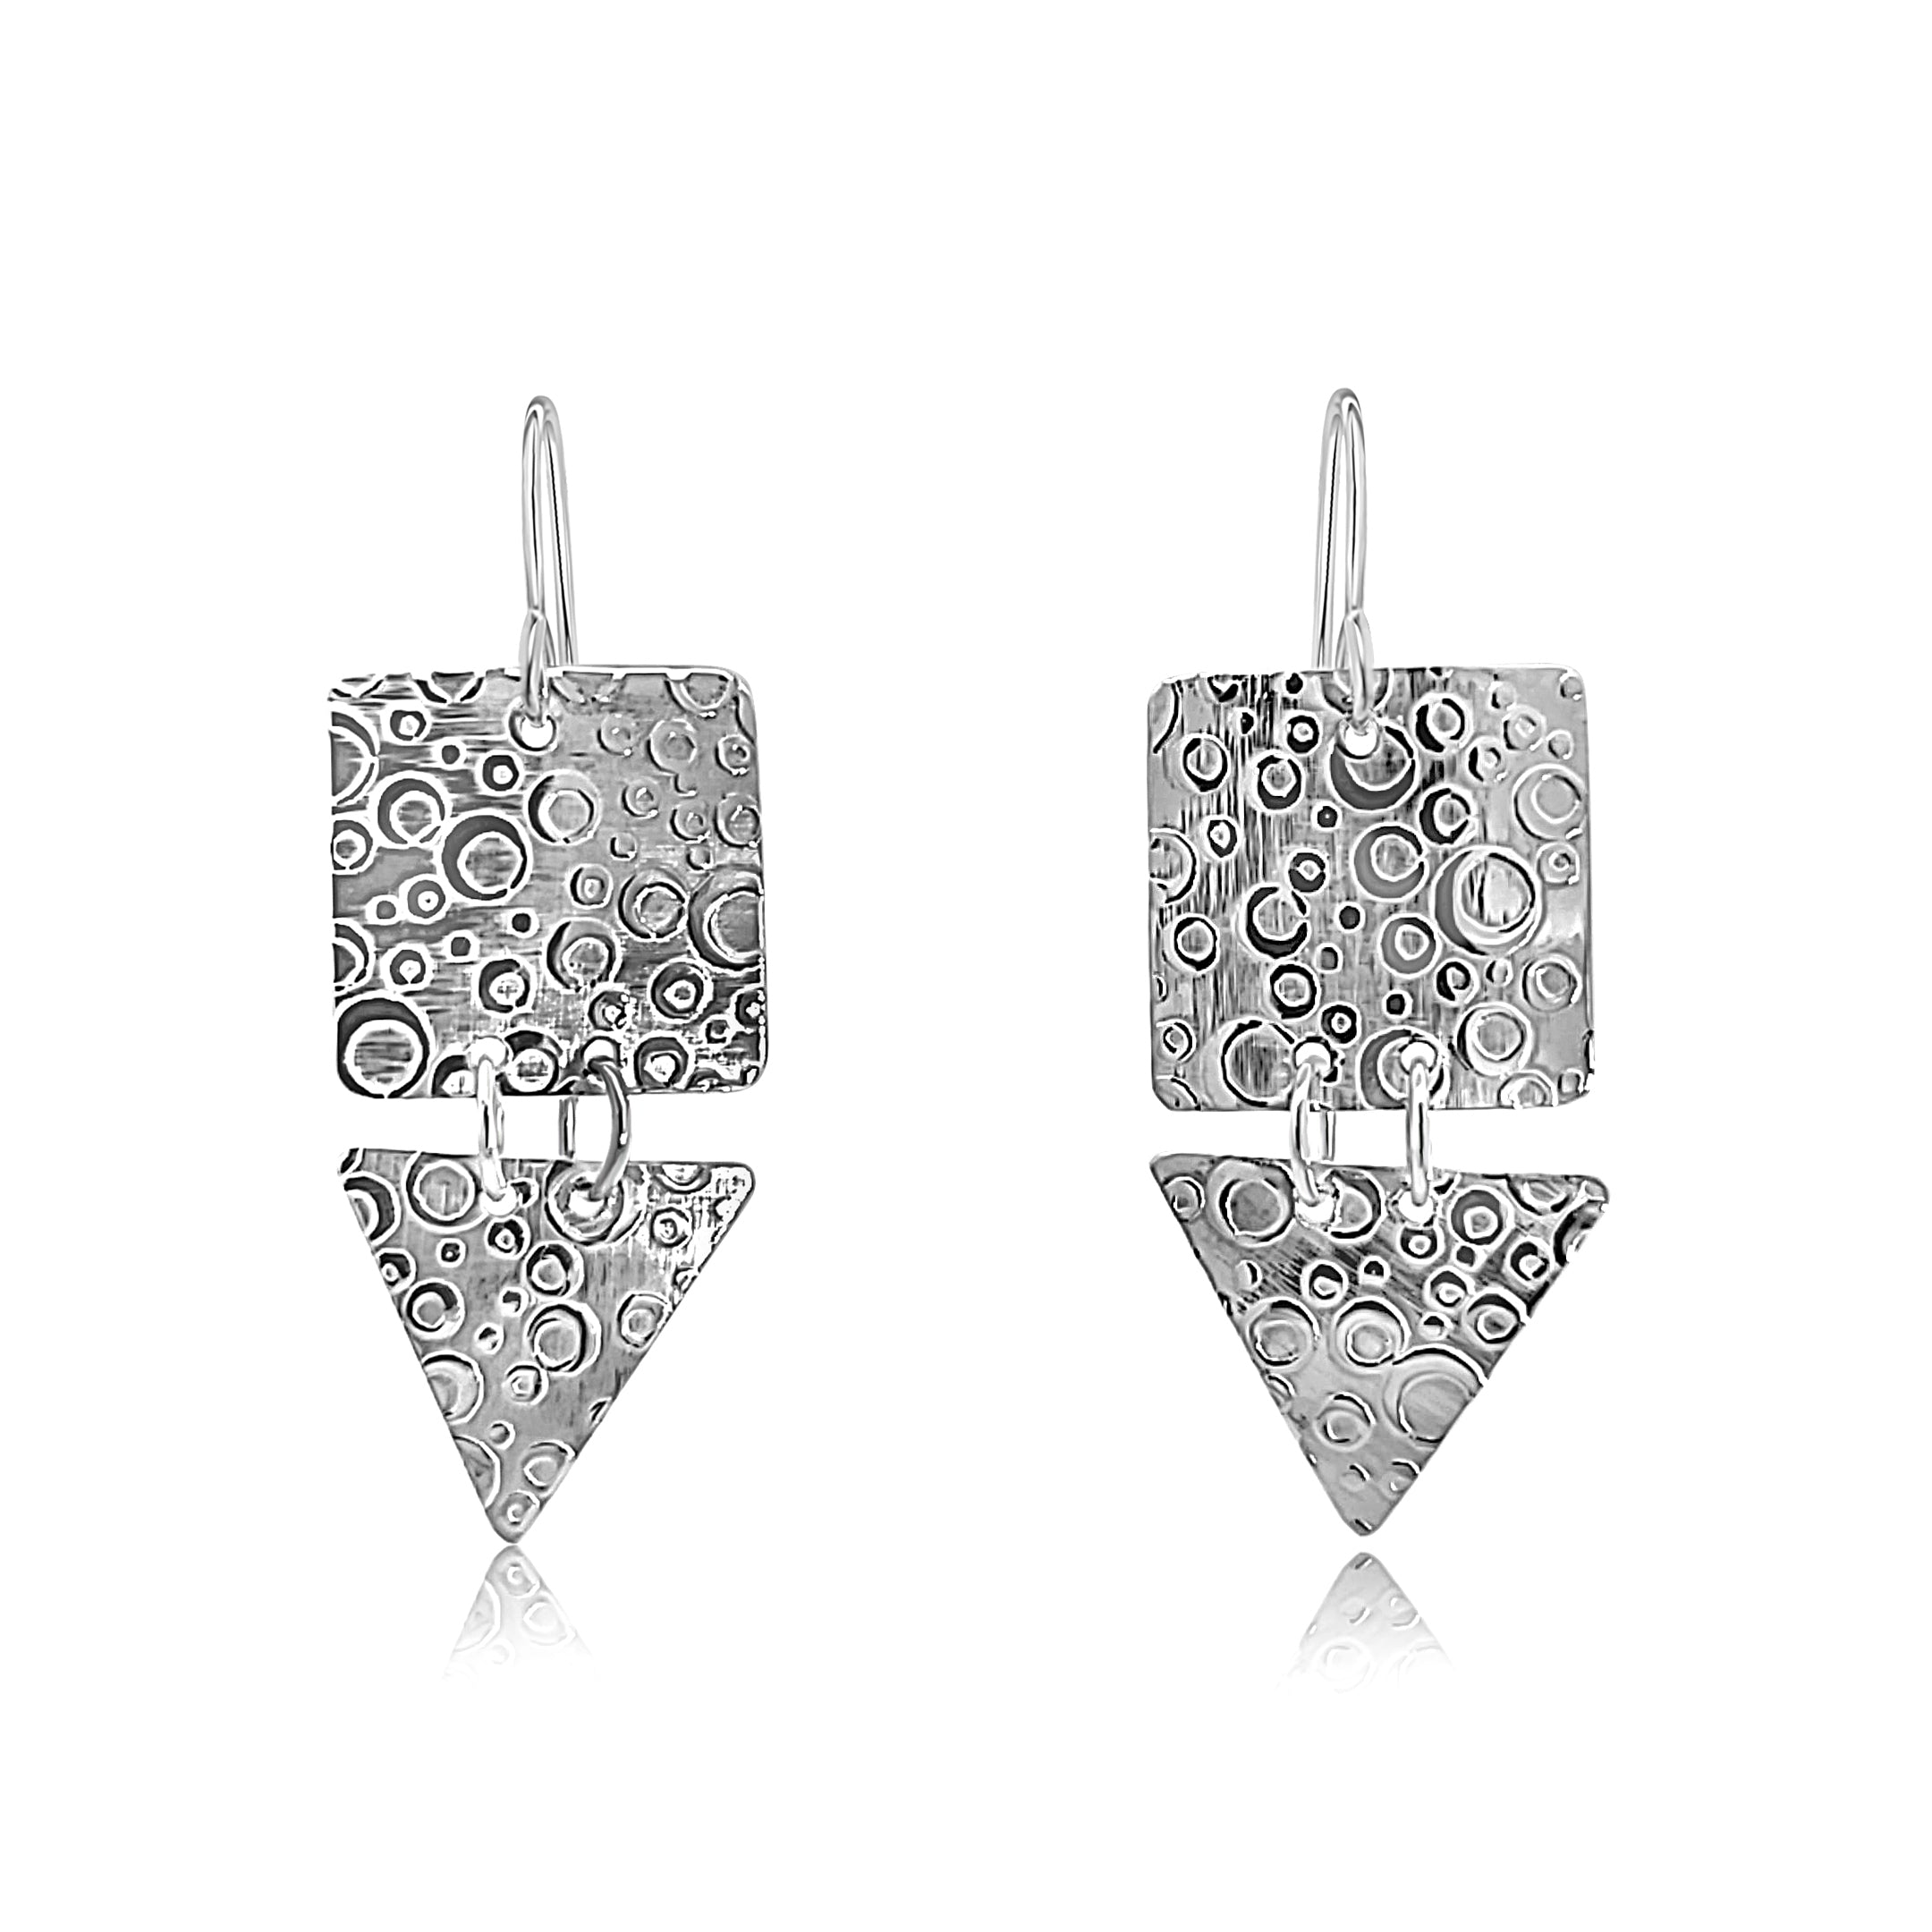 Bubble Square and Triangle Earrings